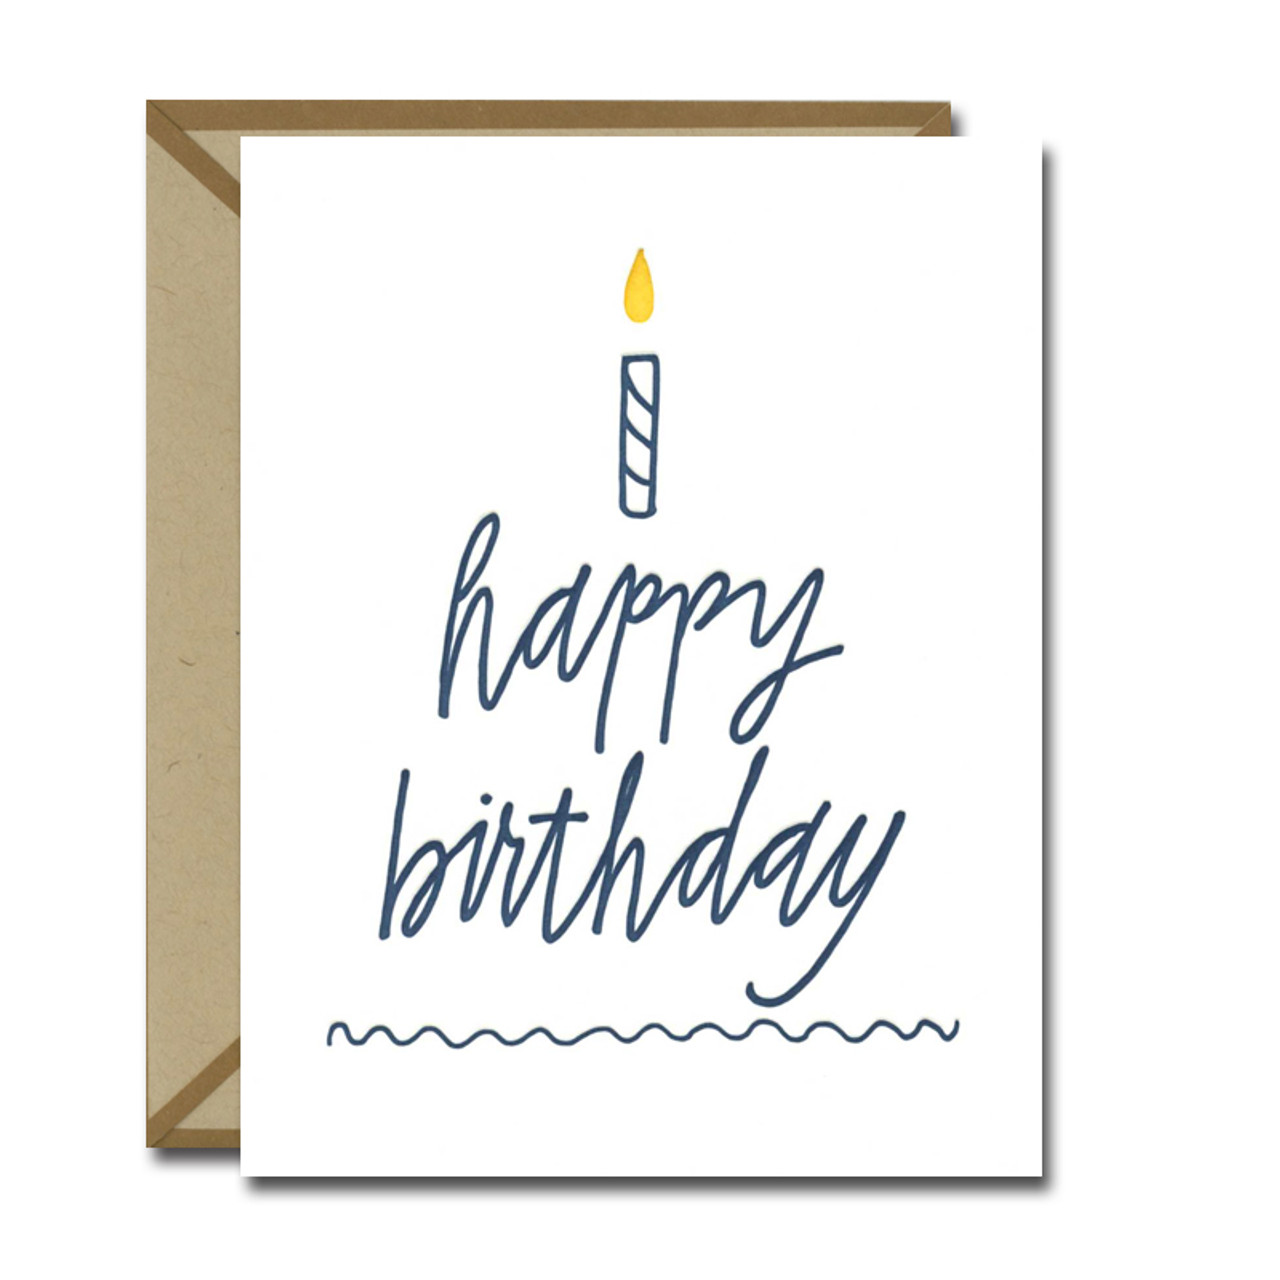 Little Cake Letterpress Card from Ink Meets Paper